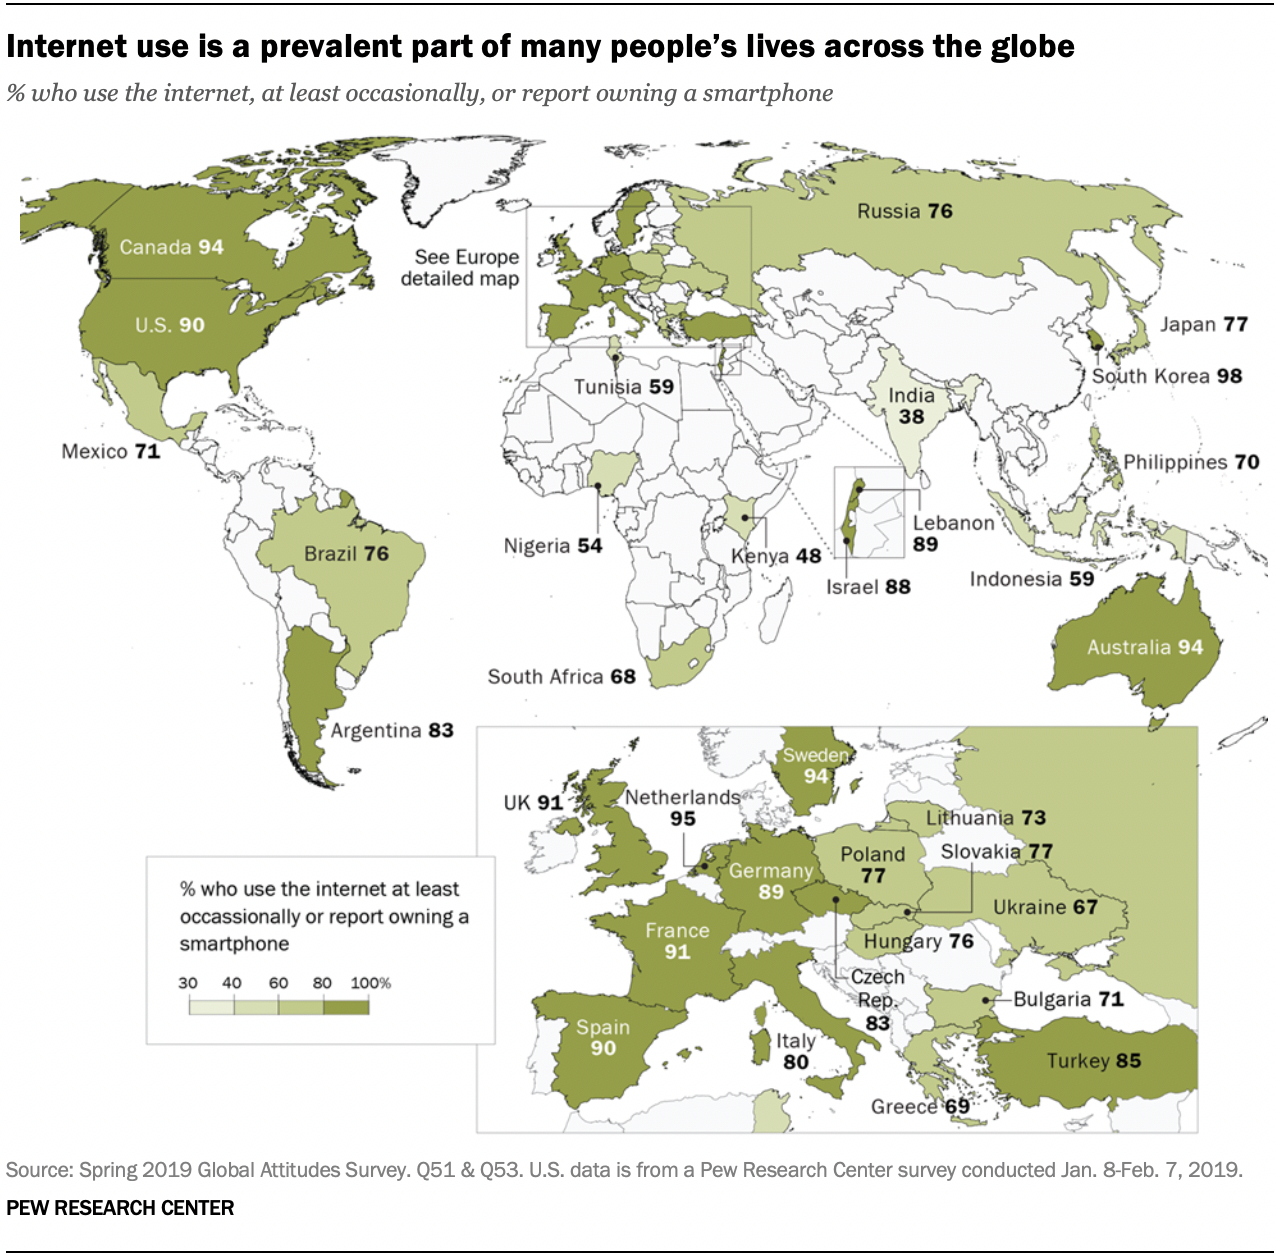 Internet use is a prevalent part of many people’s lives across the globe